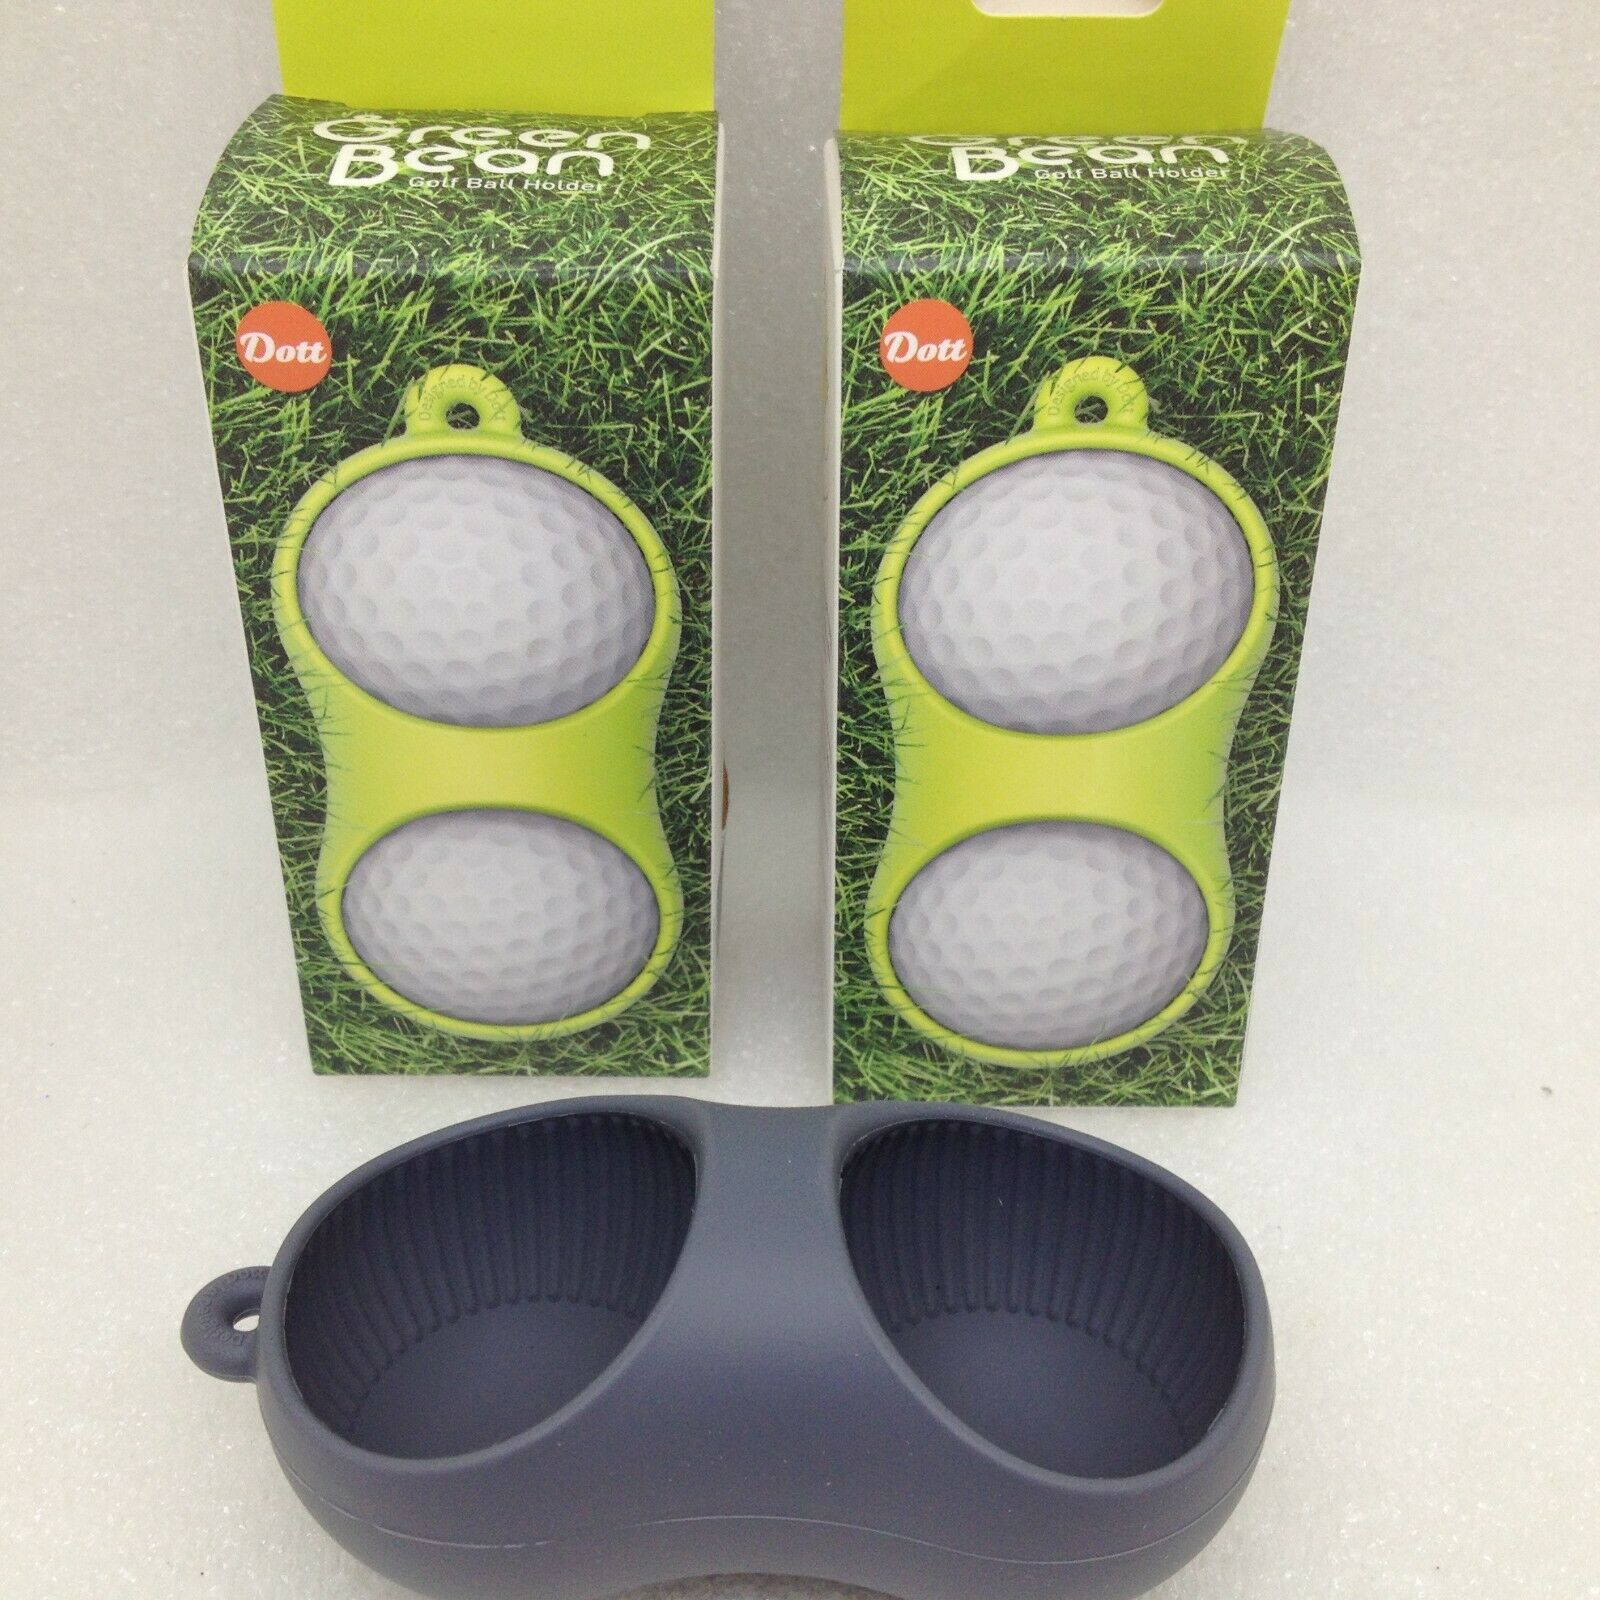 Lot of 2 Golf Ball Holder Connects to Bag Easy Access Sports Accessory